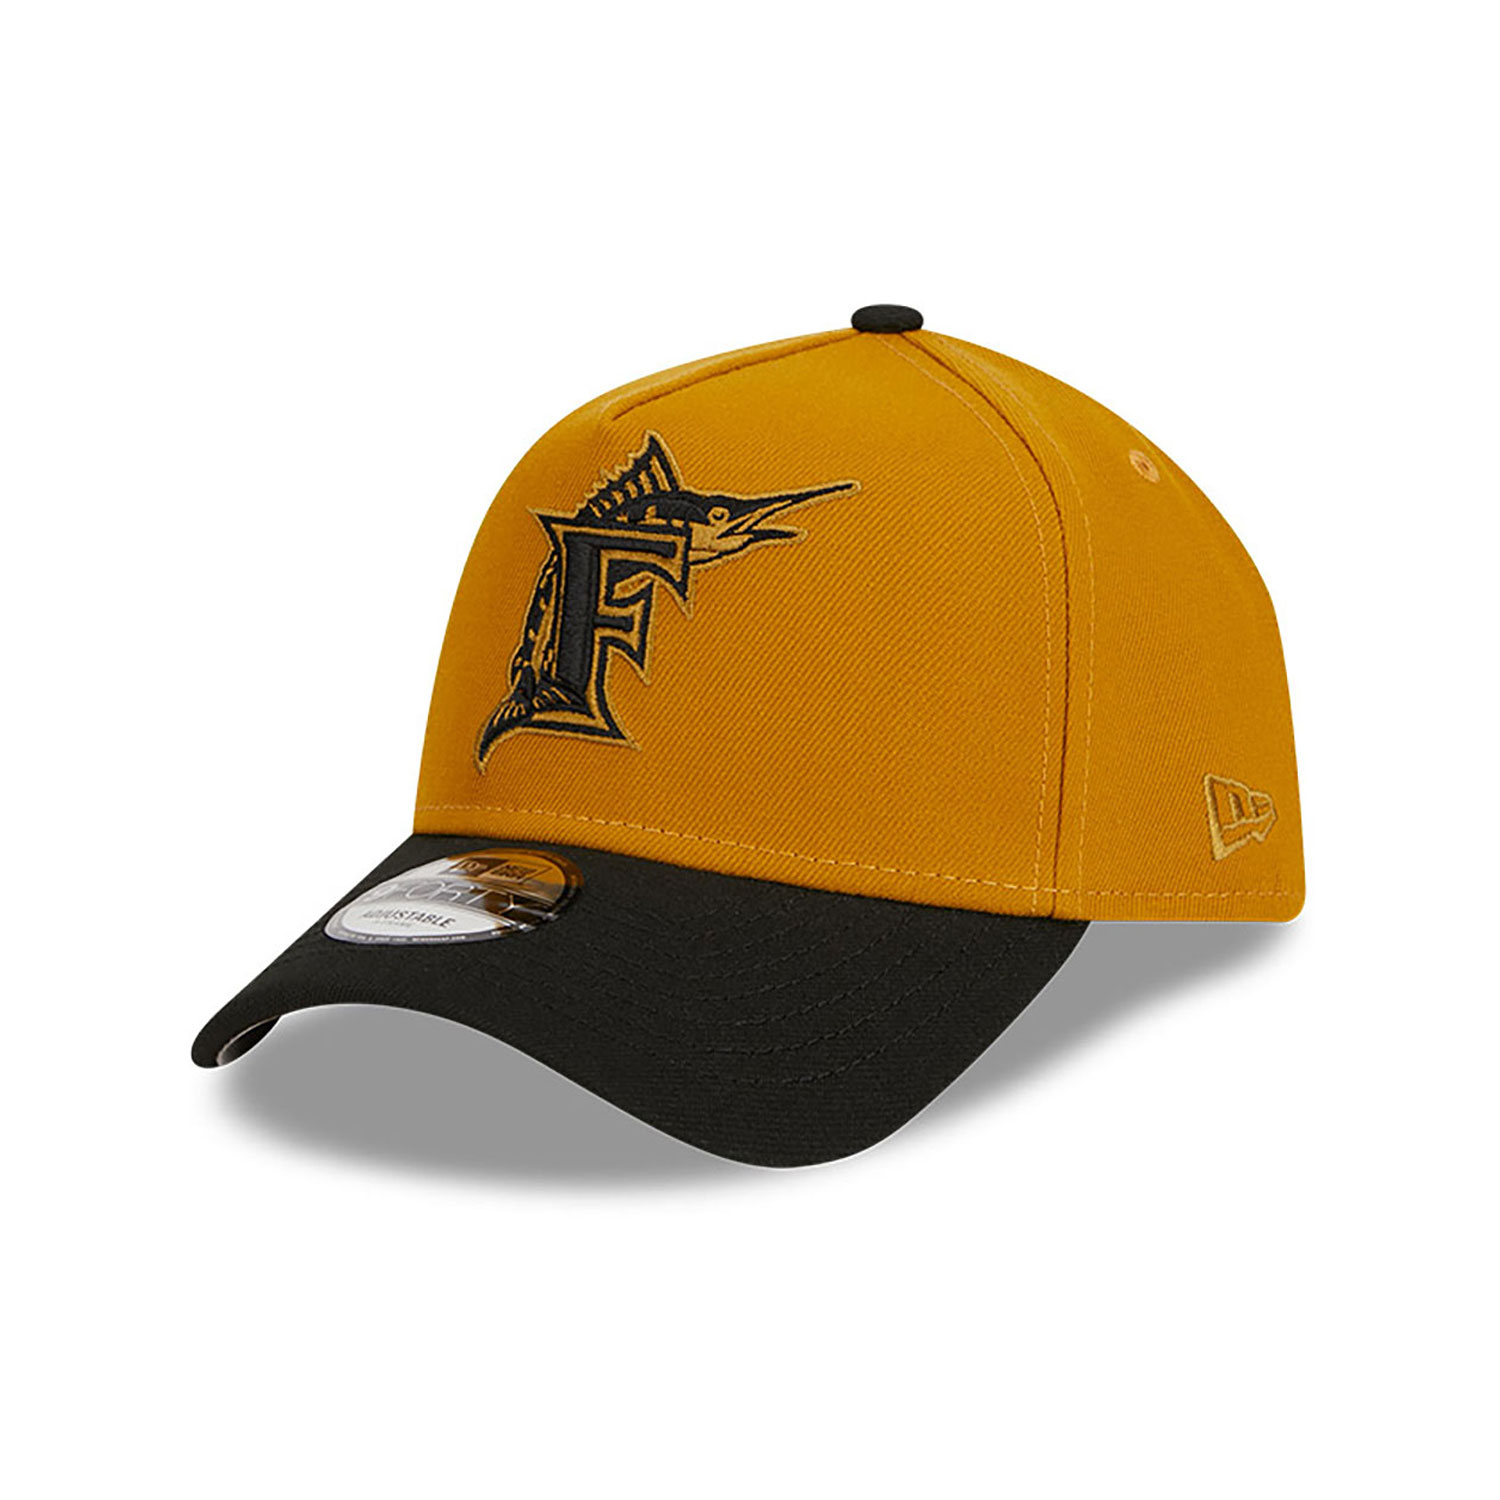 Miami Marlins Rustic Fall Gold A-Frame 9FORTY Adjustable Cap